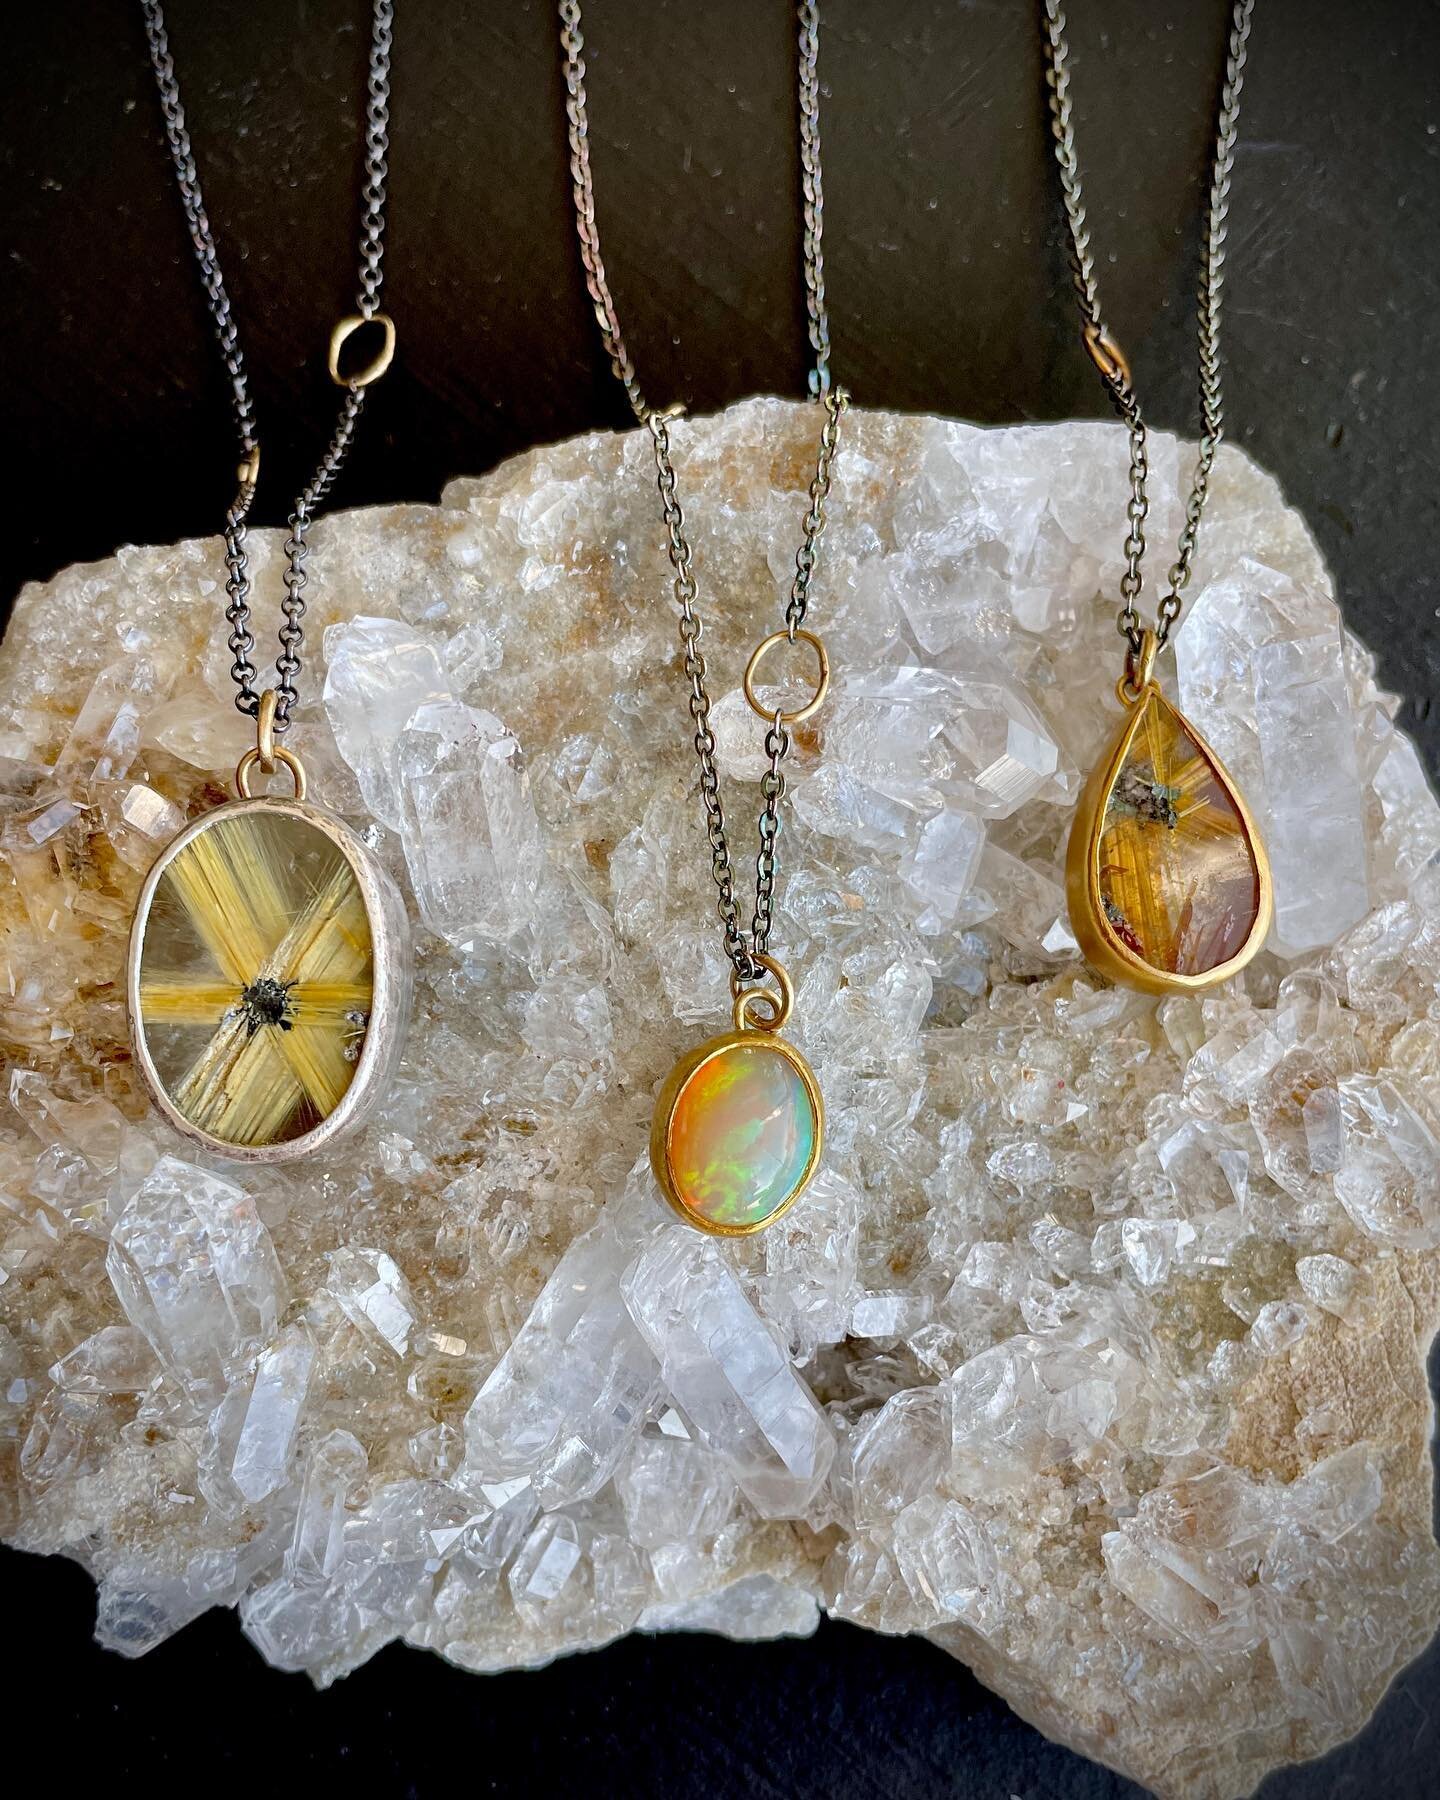 Rutilated Gold Quartz and Ethiopian Opal Pendant ✨these pieces are so versatile and perfect for everyday ✨available on website check them out #rutilatedgoldquartz #ethiopianopal #mixedmetalsjewelry #pattiramldesigns #sheboyganartist #handcraftedjewel